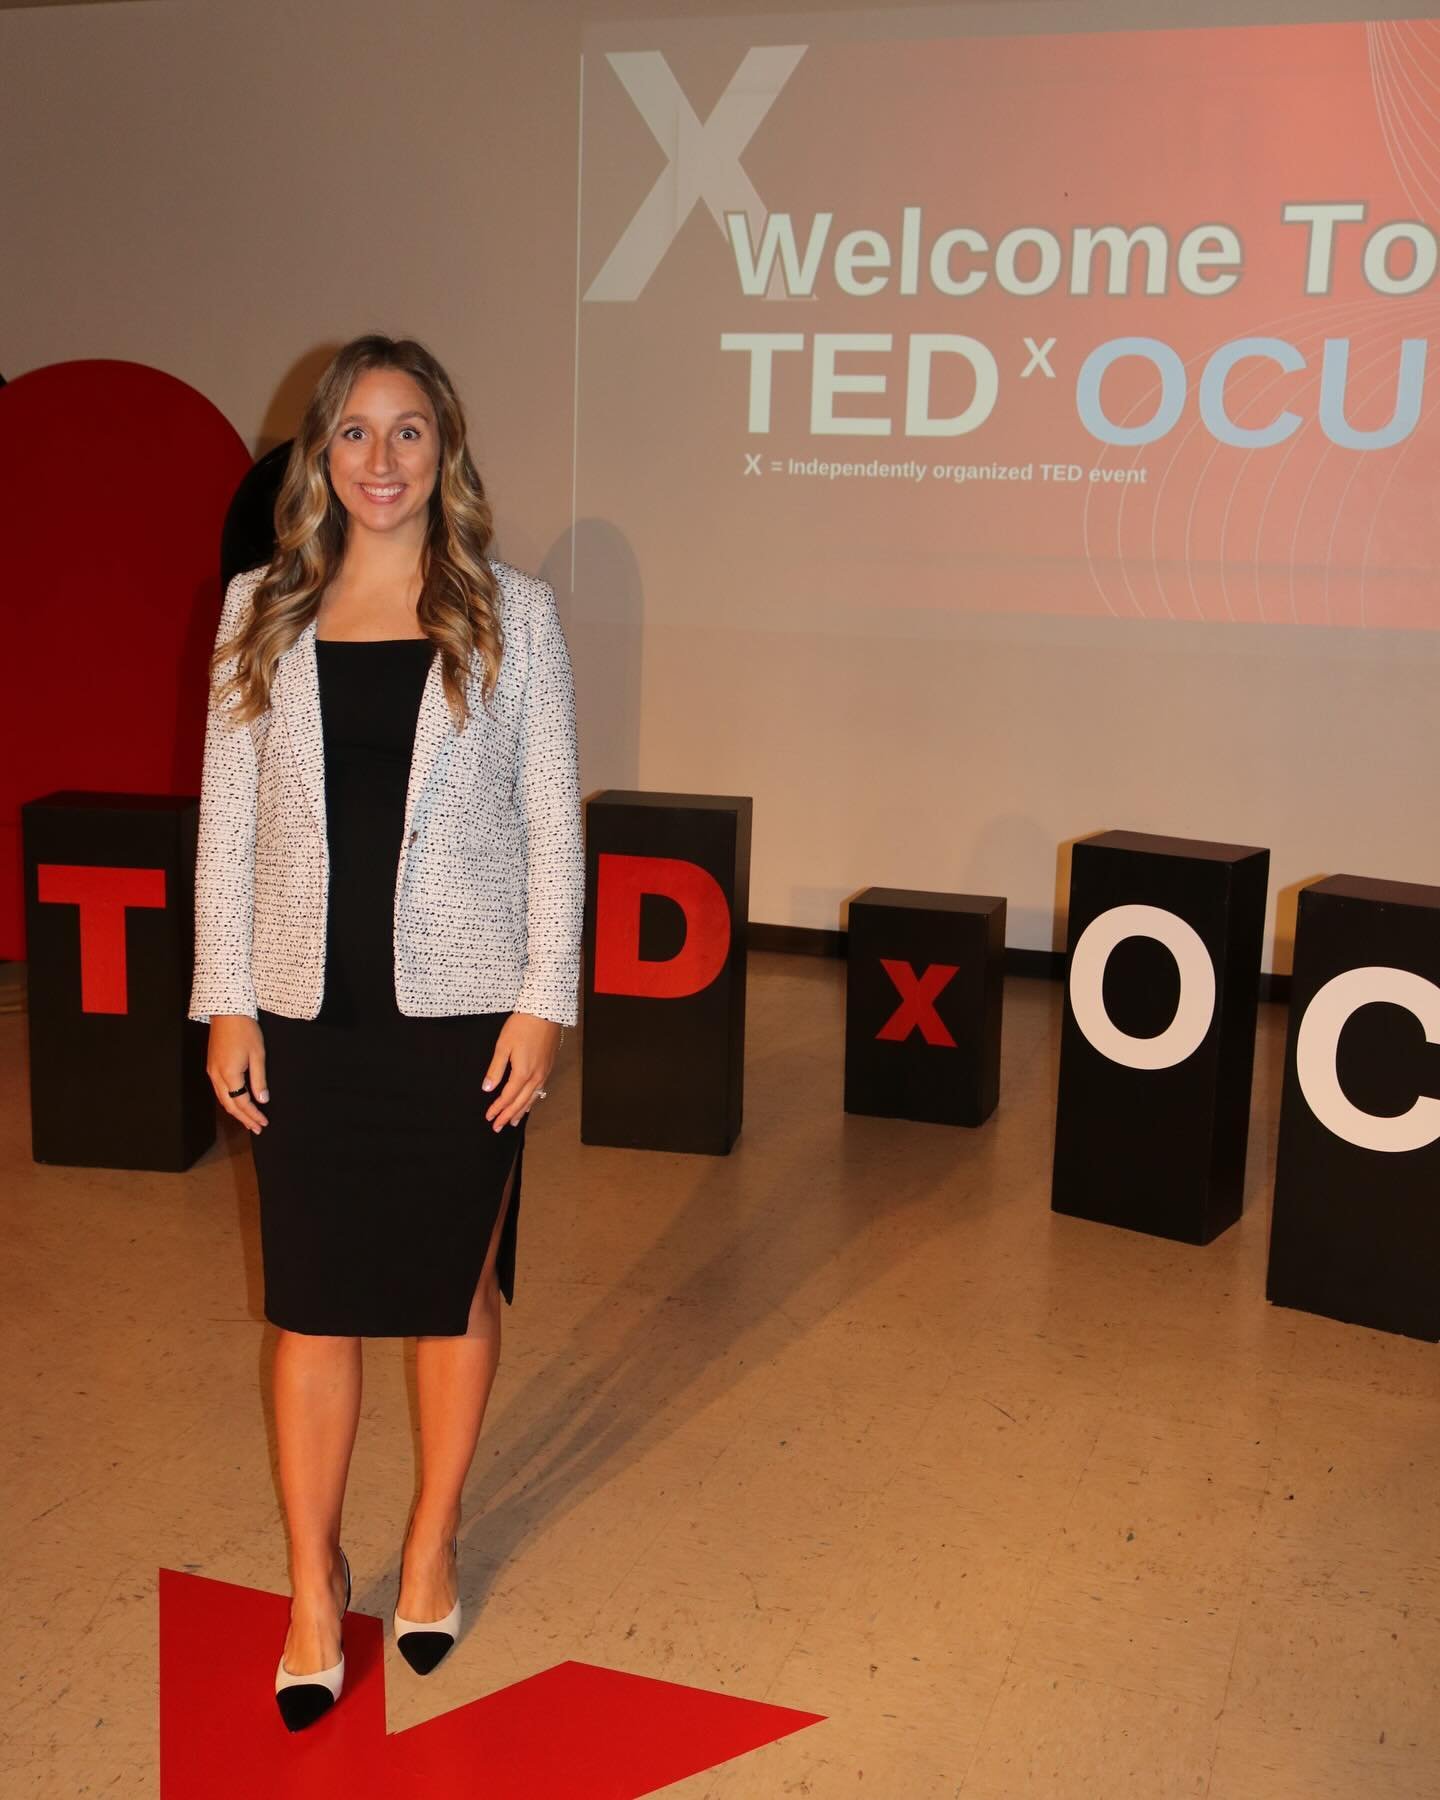 TEDxOCU

I flew to Indiana this past weekend to present my very first TEDx talk and it was AMAZING! 

After being asked to be a part of it and hearing that the theme of this specific TEDx event was &ldquo;Anything is Possible&rdquo; I couldn&rsquo;t 